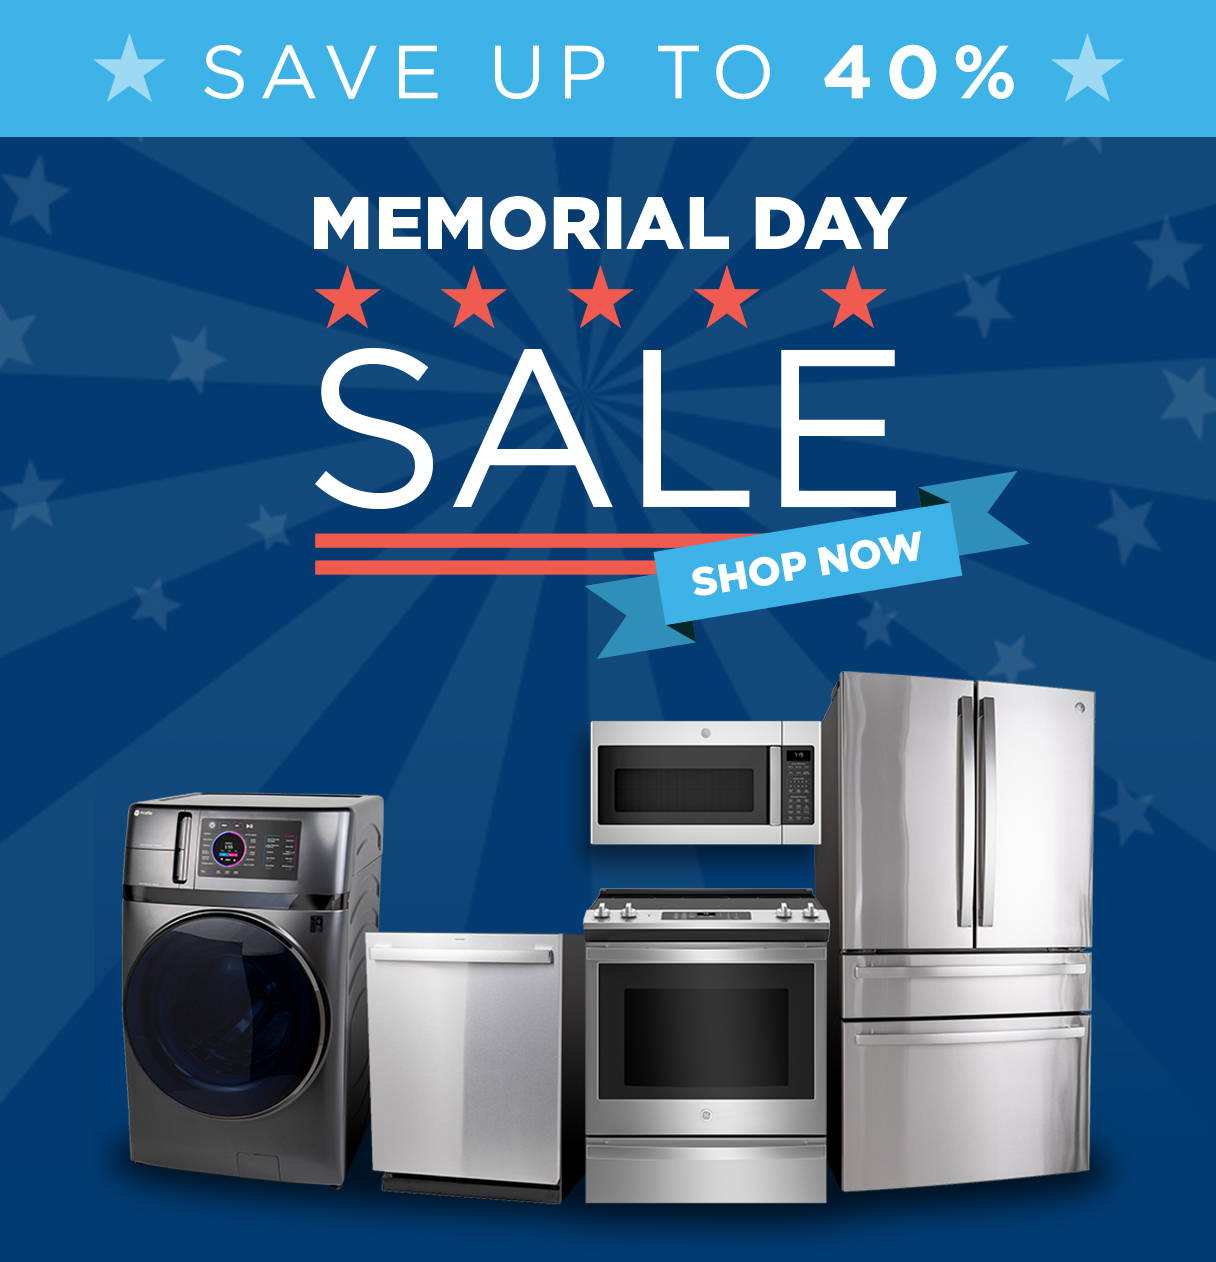 Save up to 40% OFF select major appliances